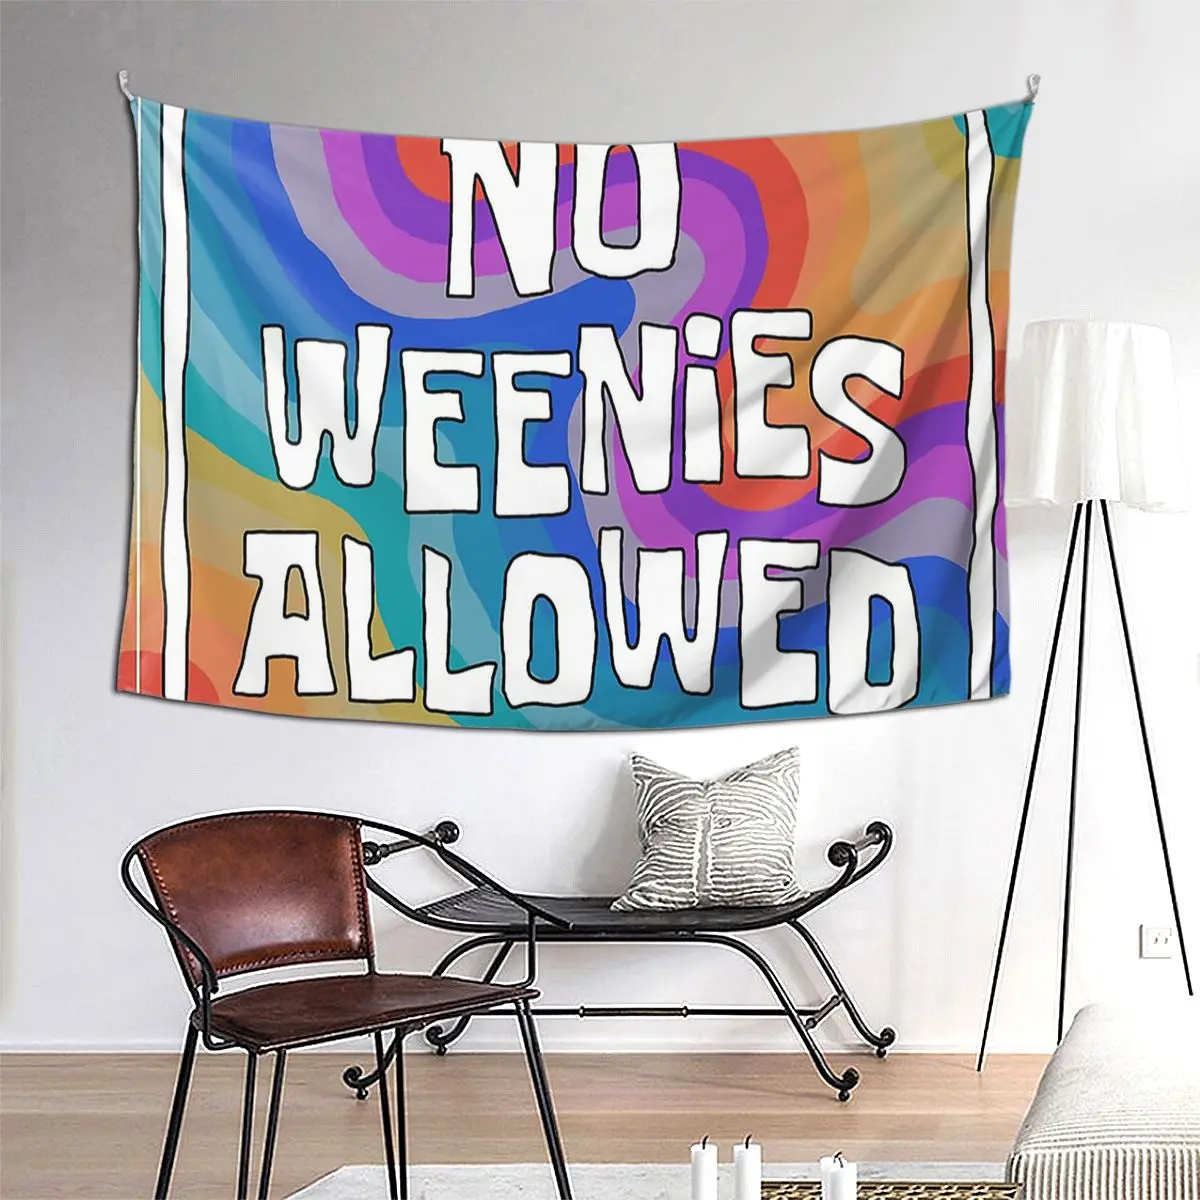 

No Weenies Allowed Tapestry Hippie Wall Hanging Aesthetic Home Decoration Tapestries for Living Room Bedroom Dorm Room